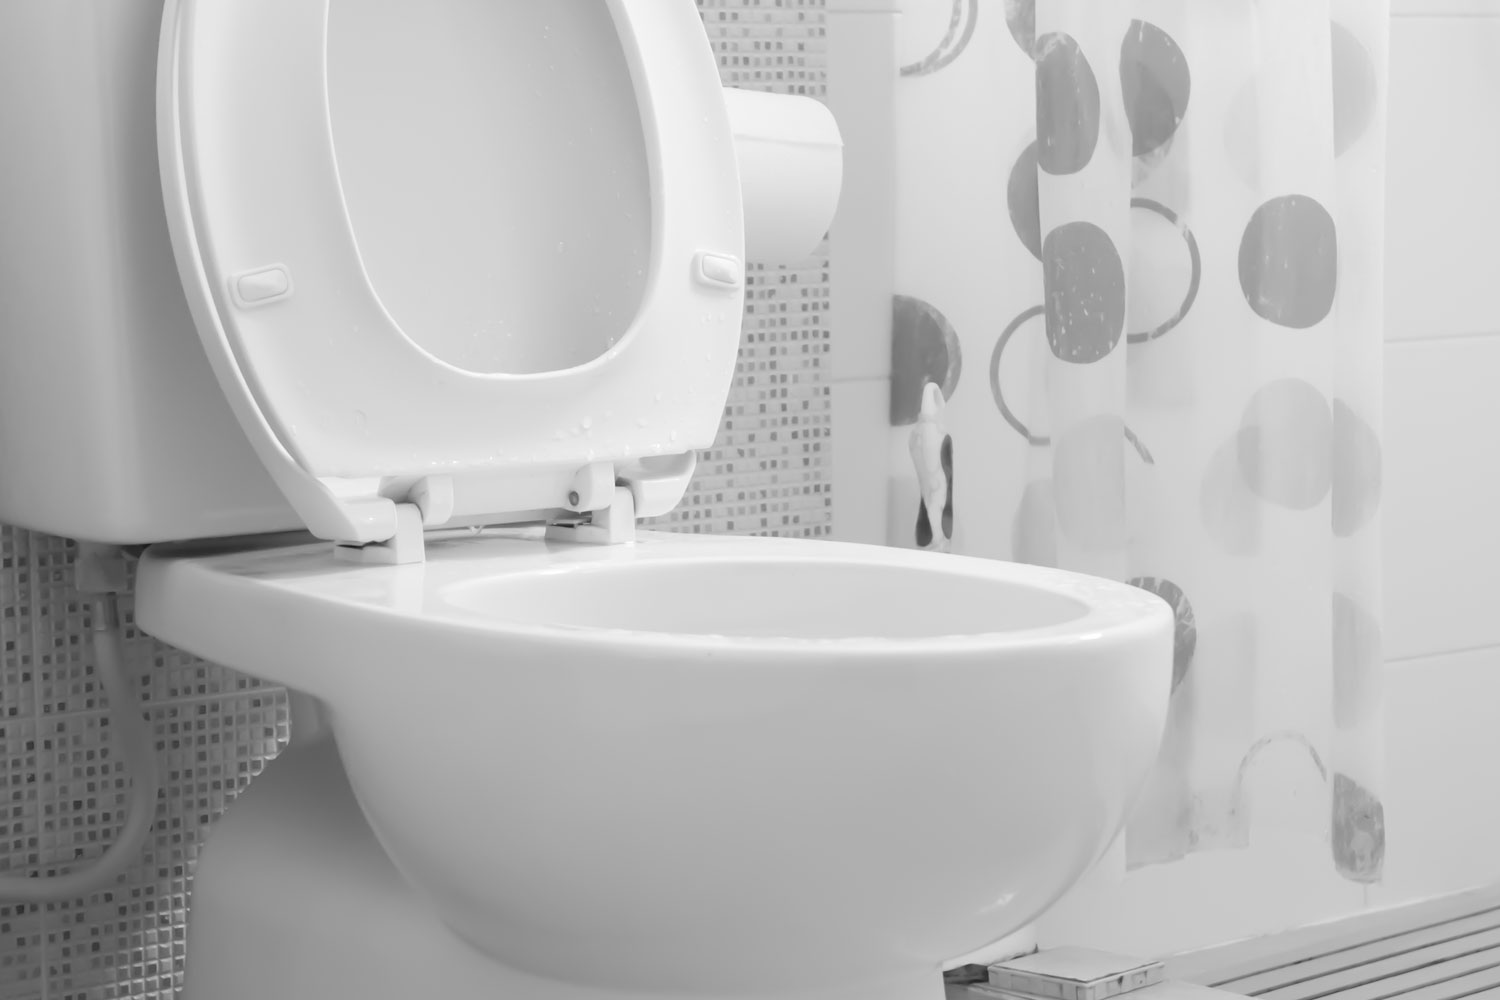 A white toilet inside a bright patterned bathroom